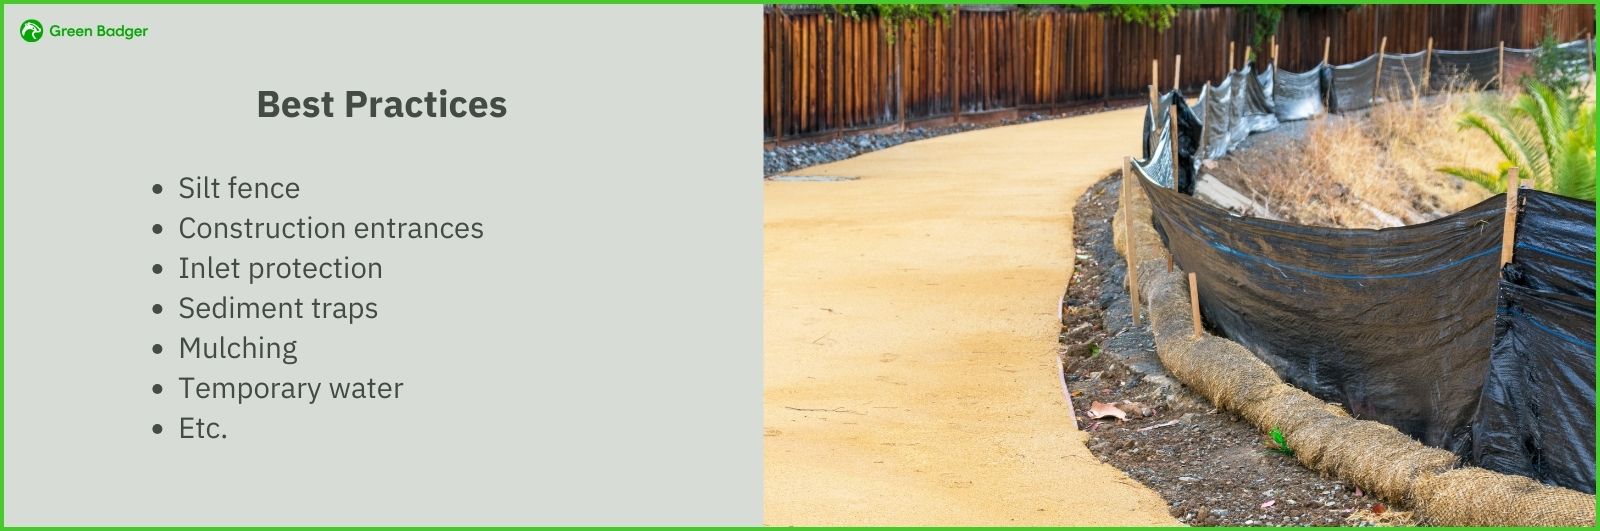 Green Badger's Ultimate Guide to LEED - Erosion Control with silt fence